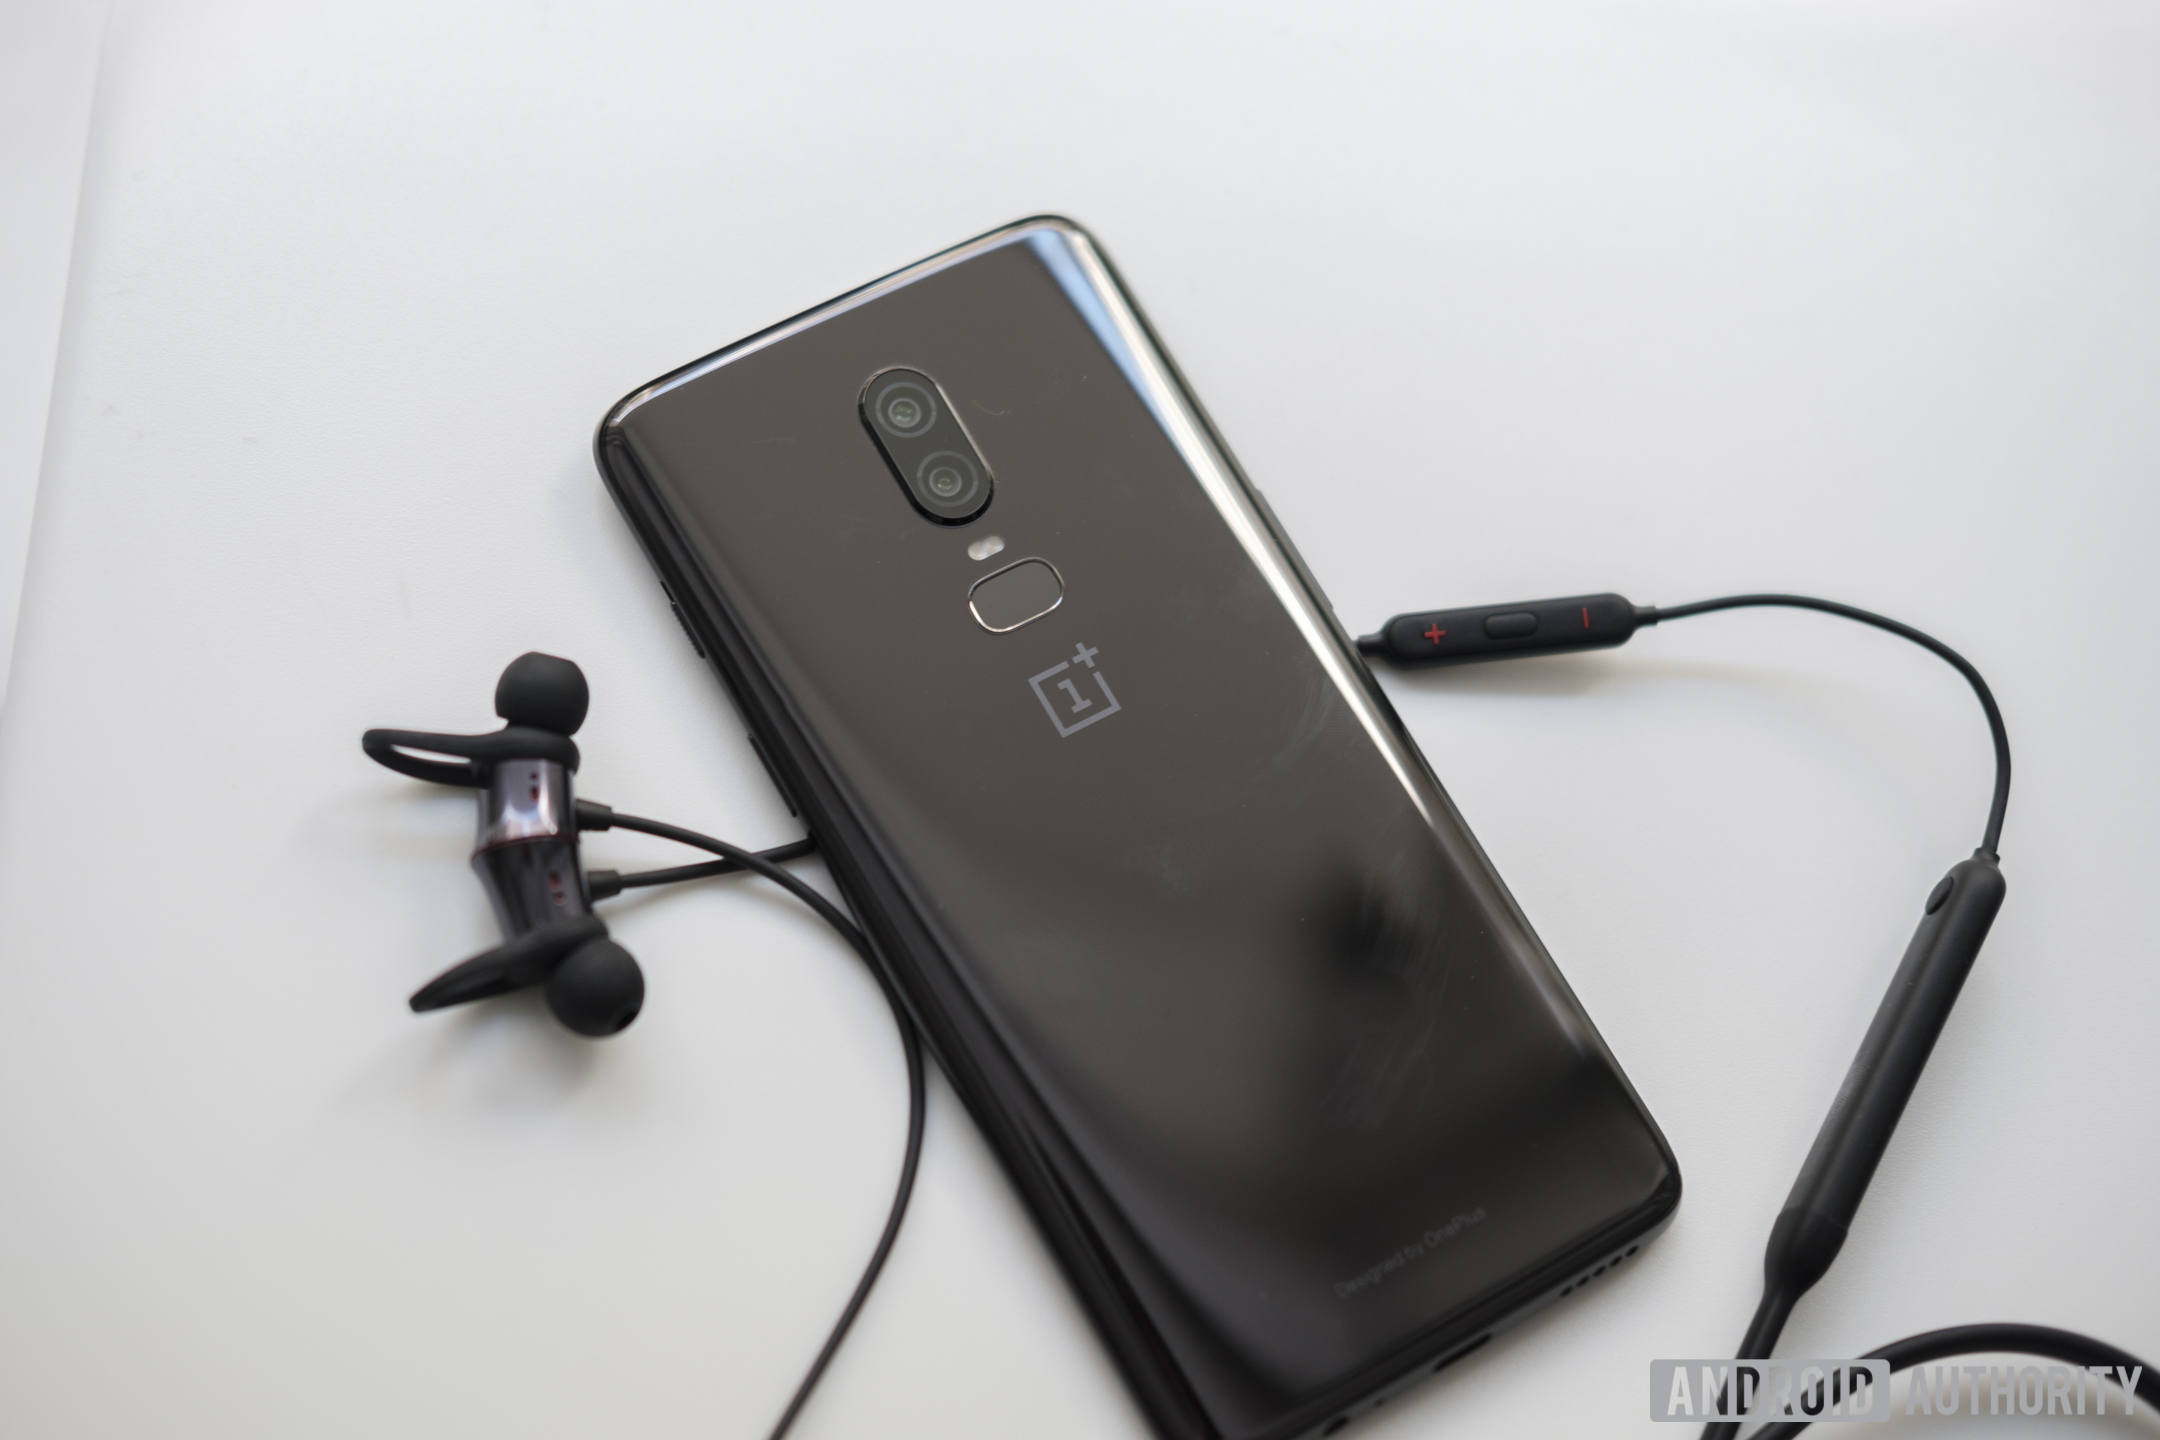 OnePlus 6 colors: Hands-on with midnight black, mirror black, and 